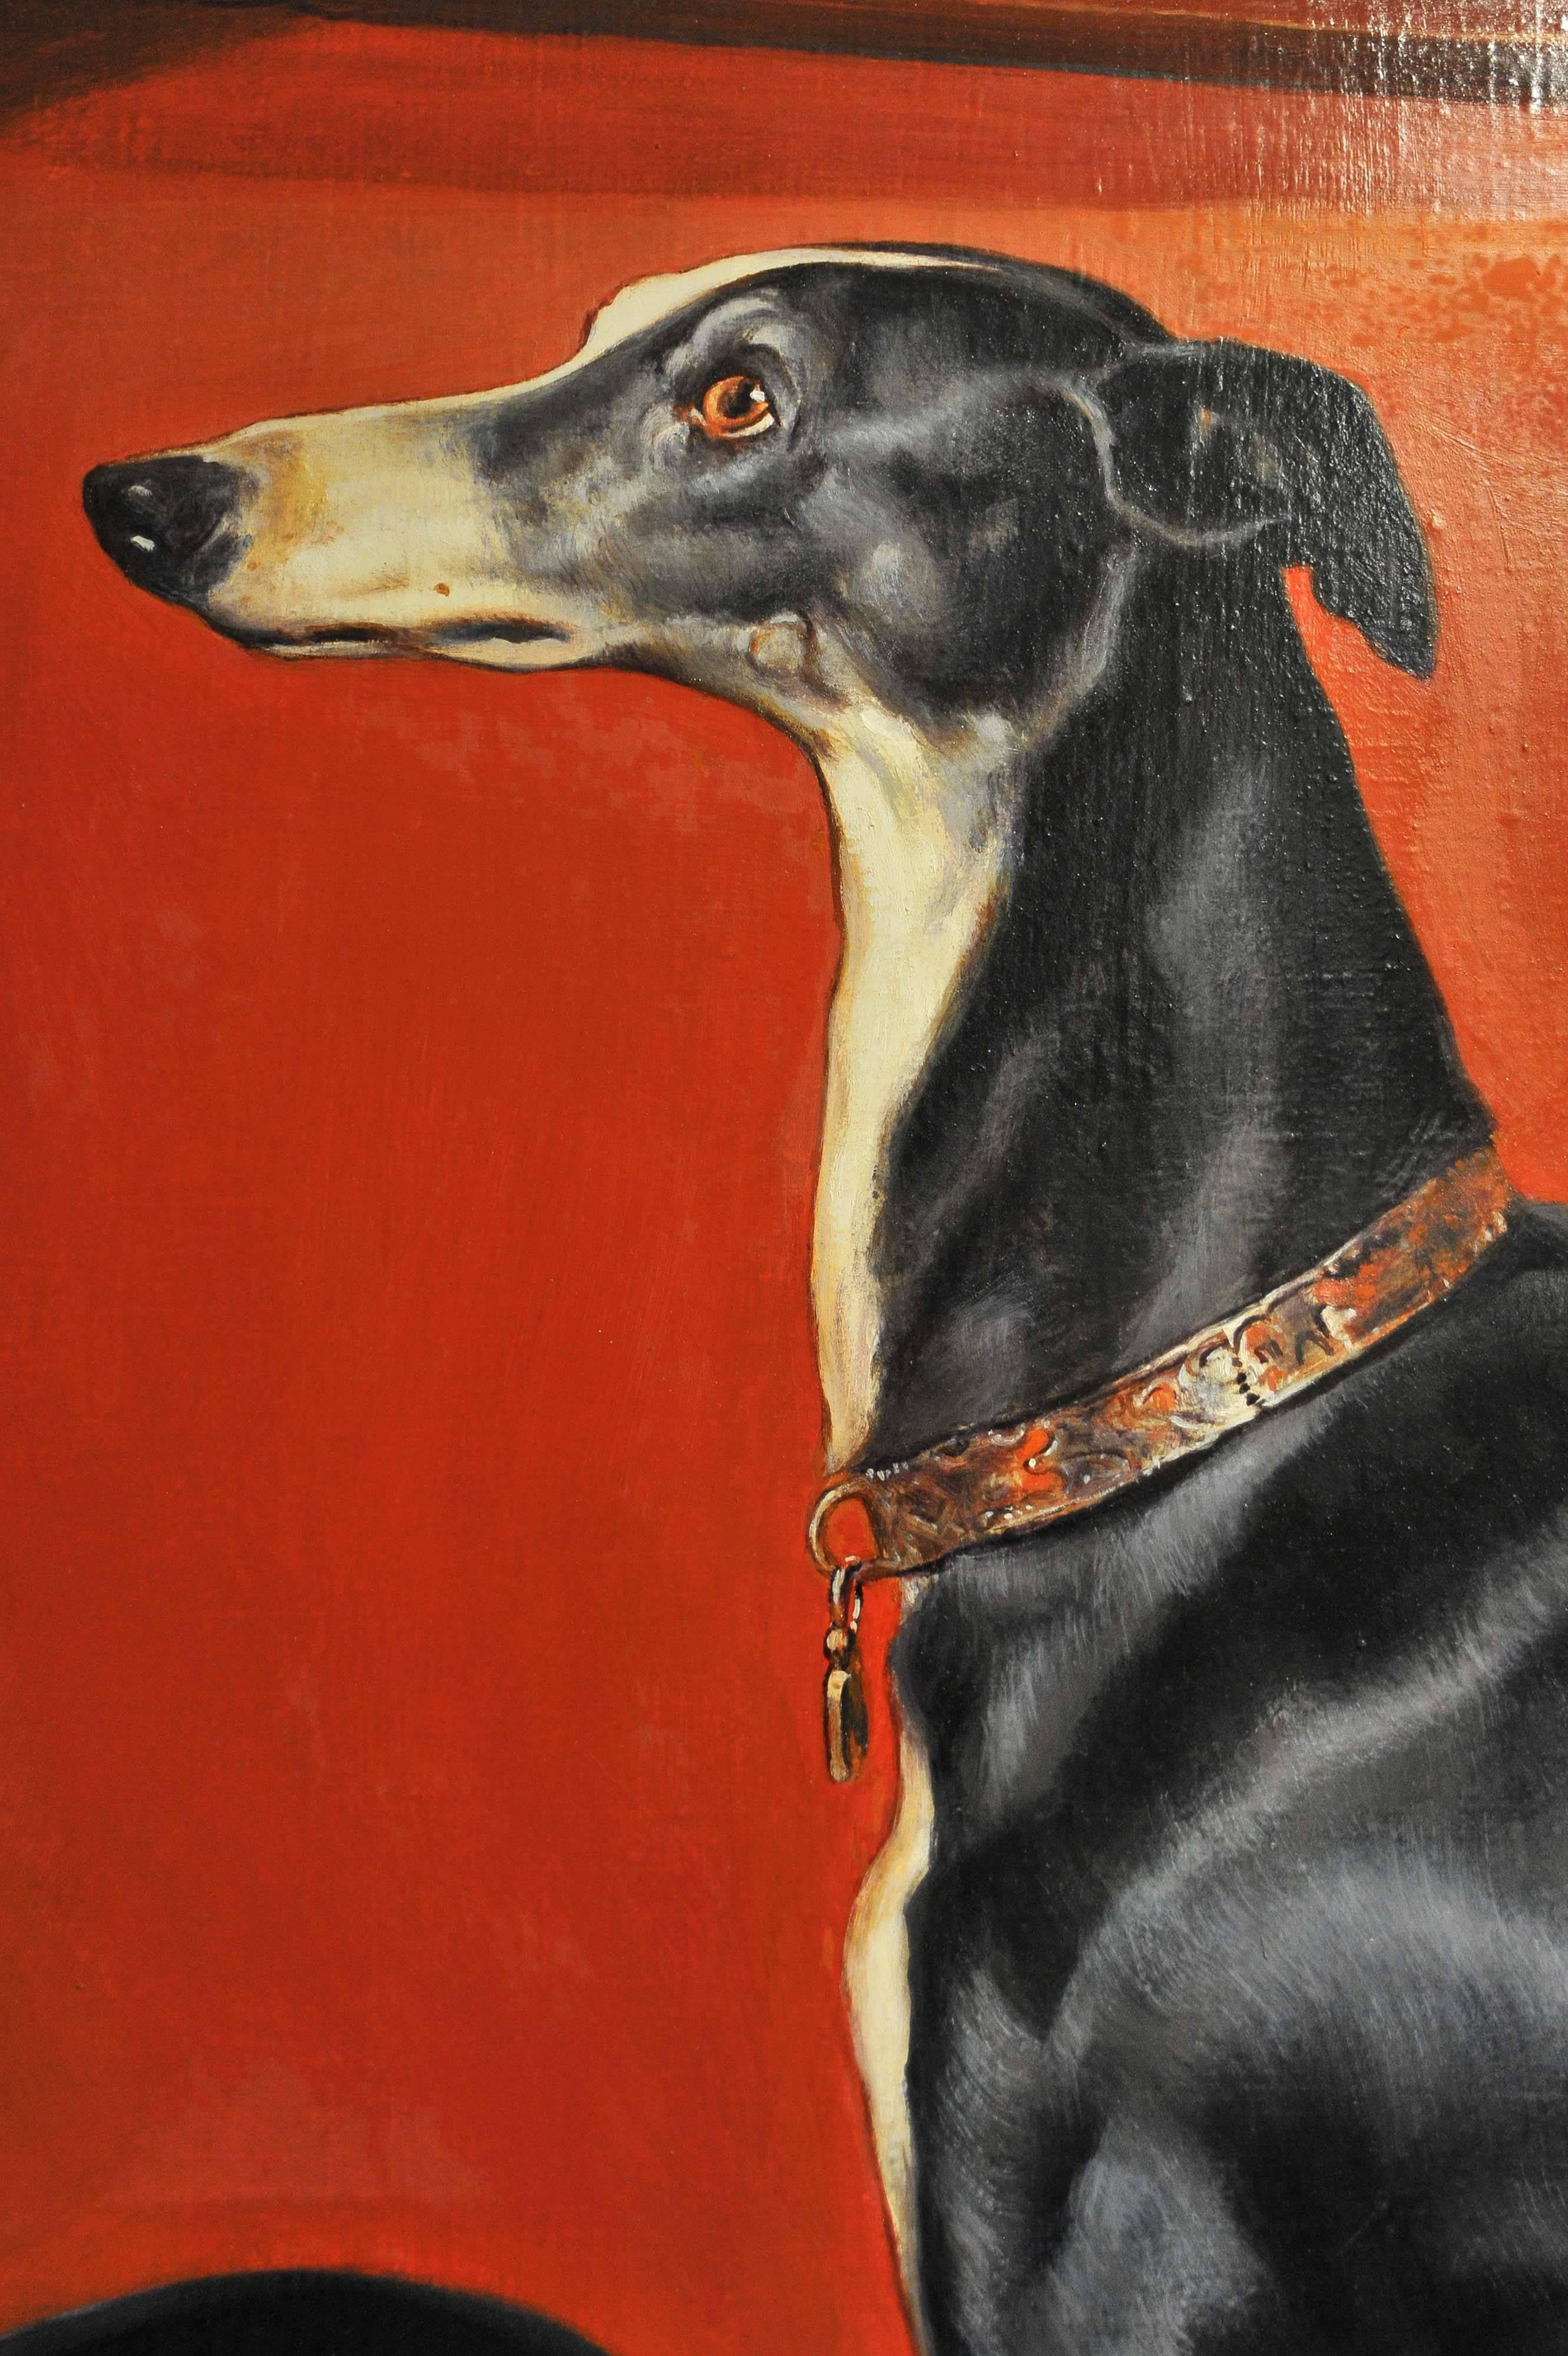 This lovely reproduction of Eos is after the original painting by Sir Edward Landseer, and is unsigned. The painting is very well executed and the artist has captured the greyhound’s expression beautifully. It measures 55 in, 140 cm wide by 43 .¼